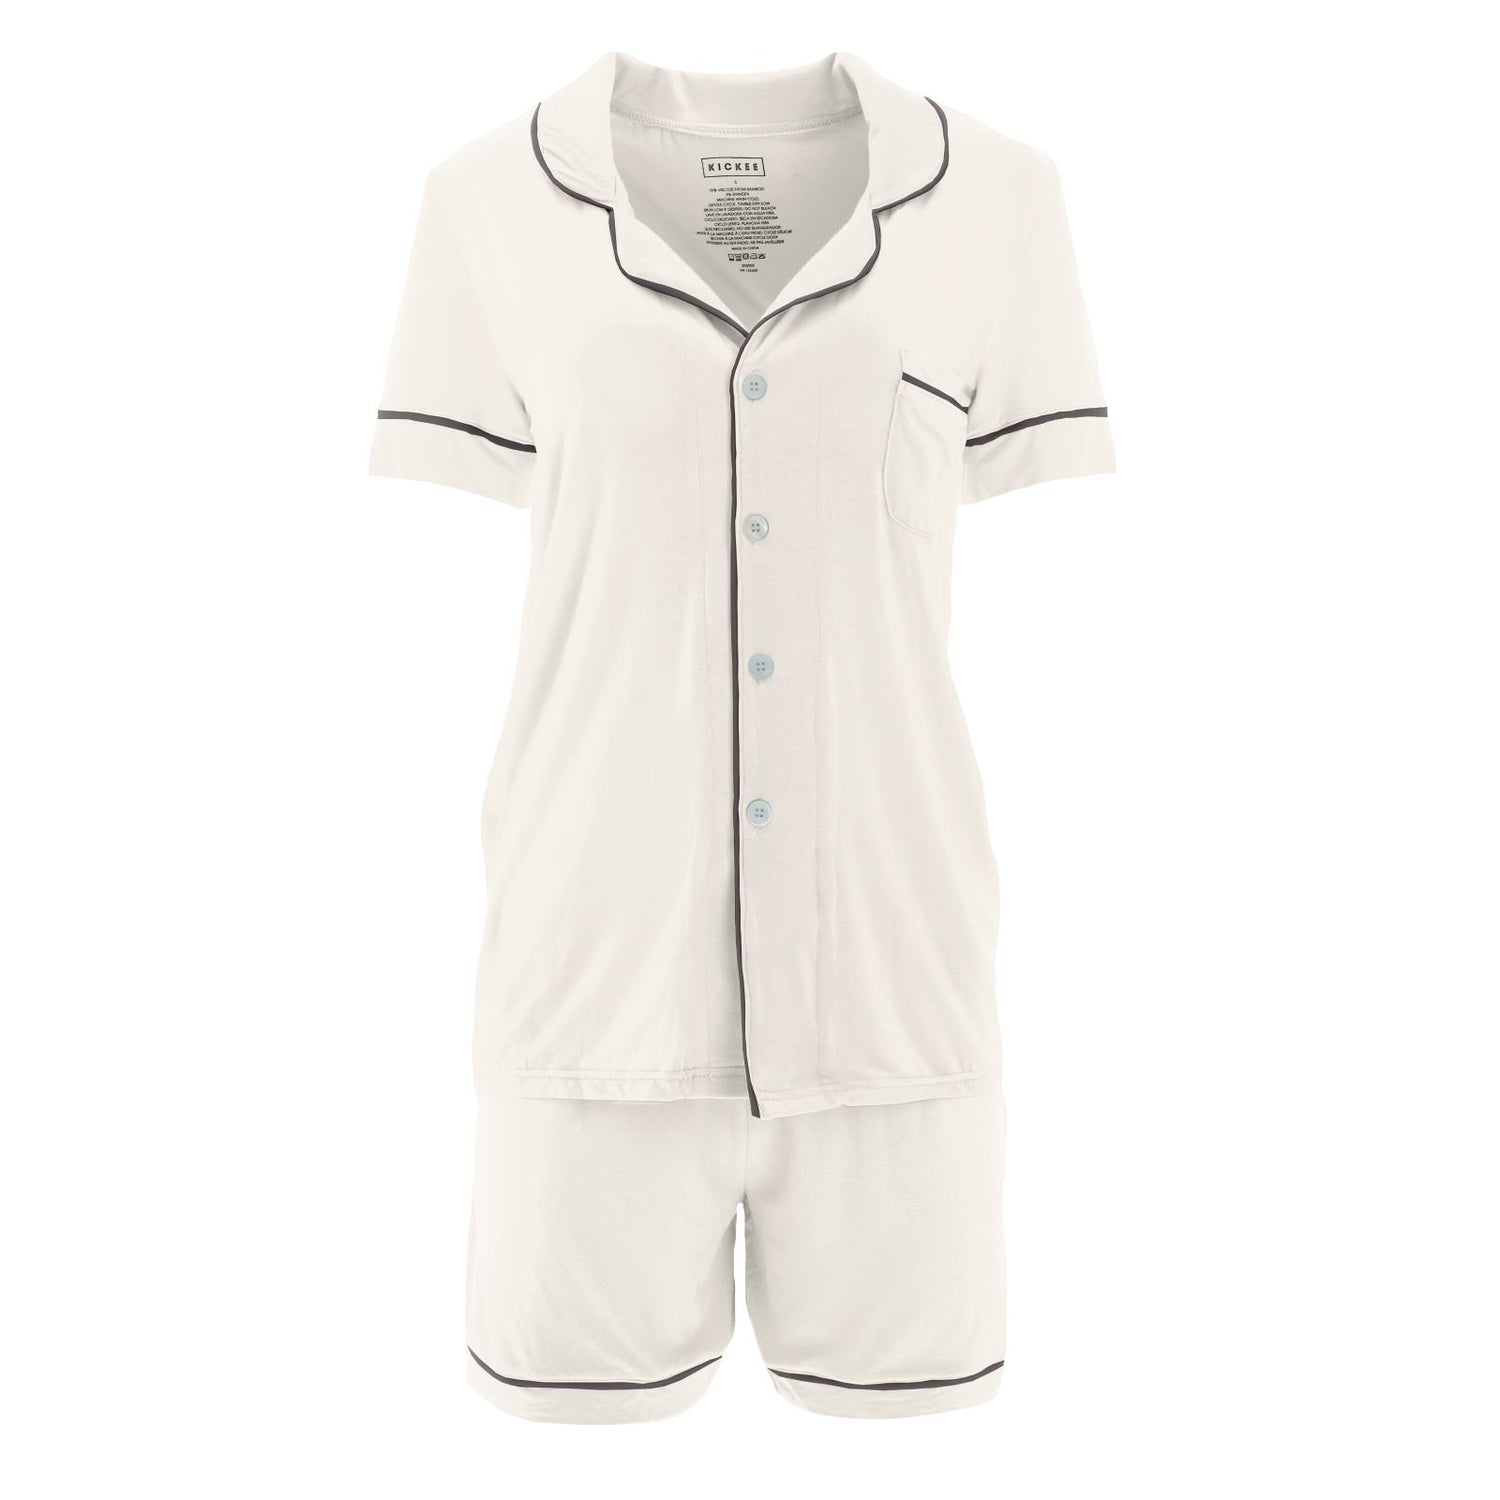 Women's Short Sleeve Collared Pajama Set with Shorts in Natural with Midnight